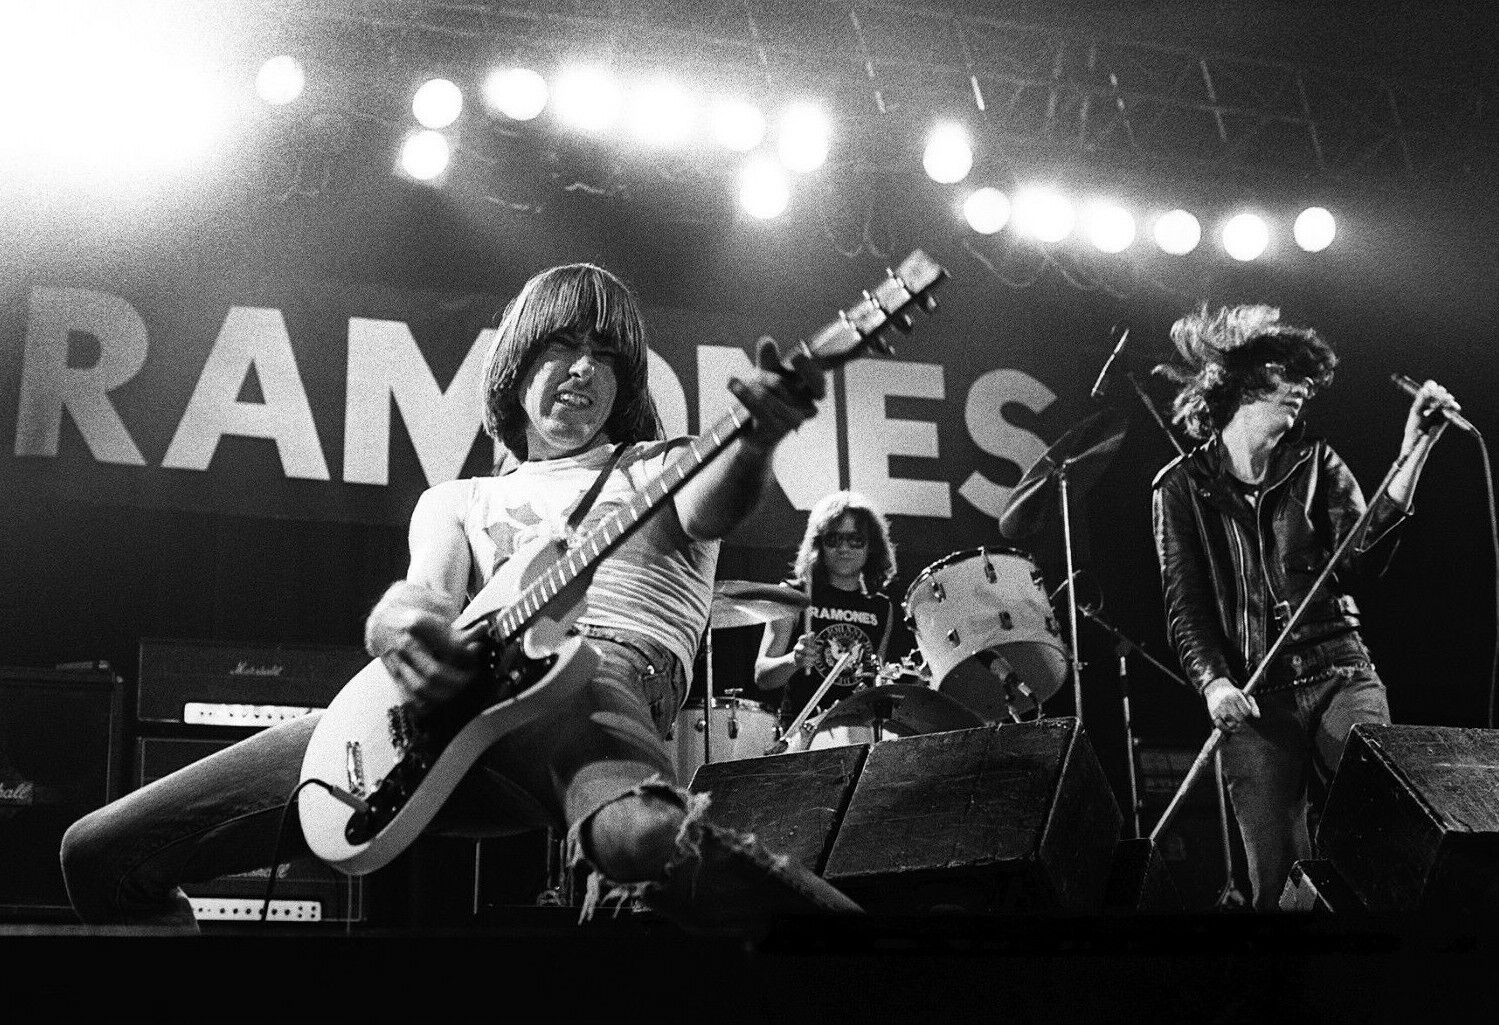 Punk Rock Band Group The Ramones in Concert on Stage Poster Photo 8\